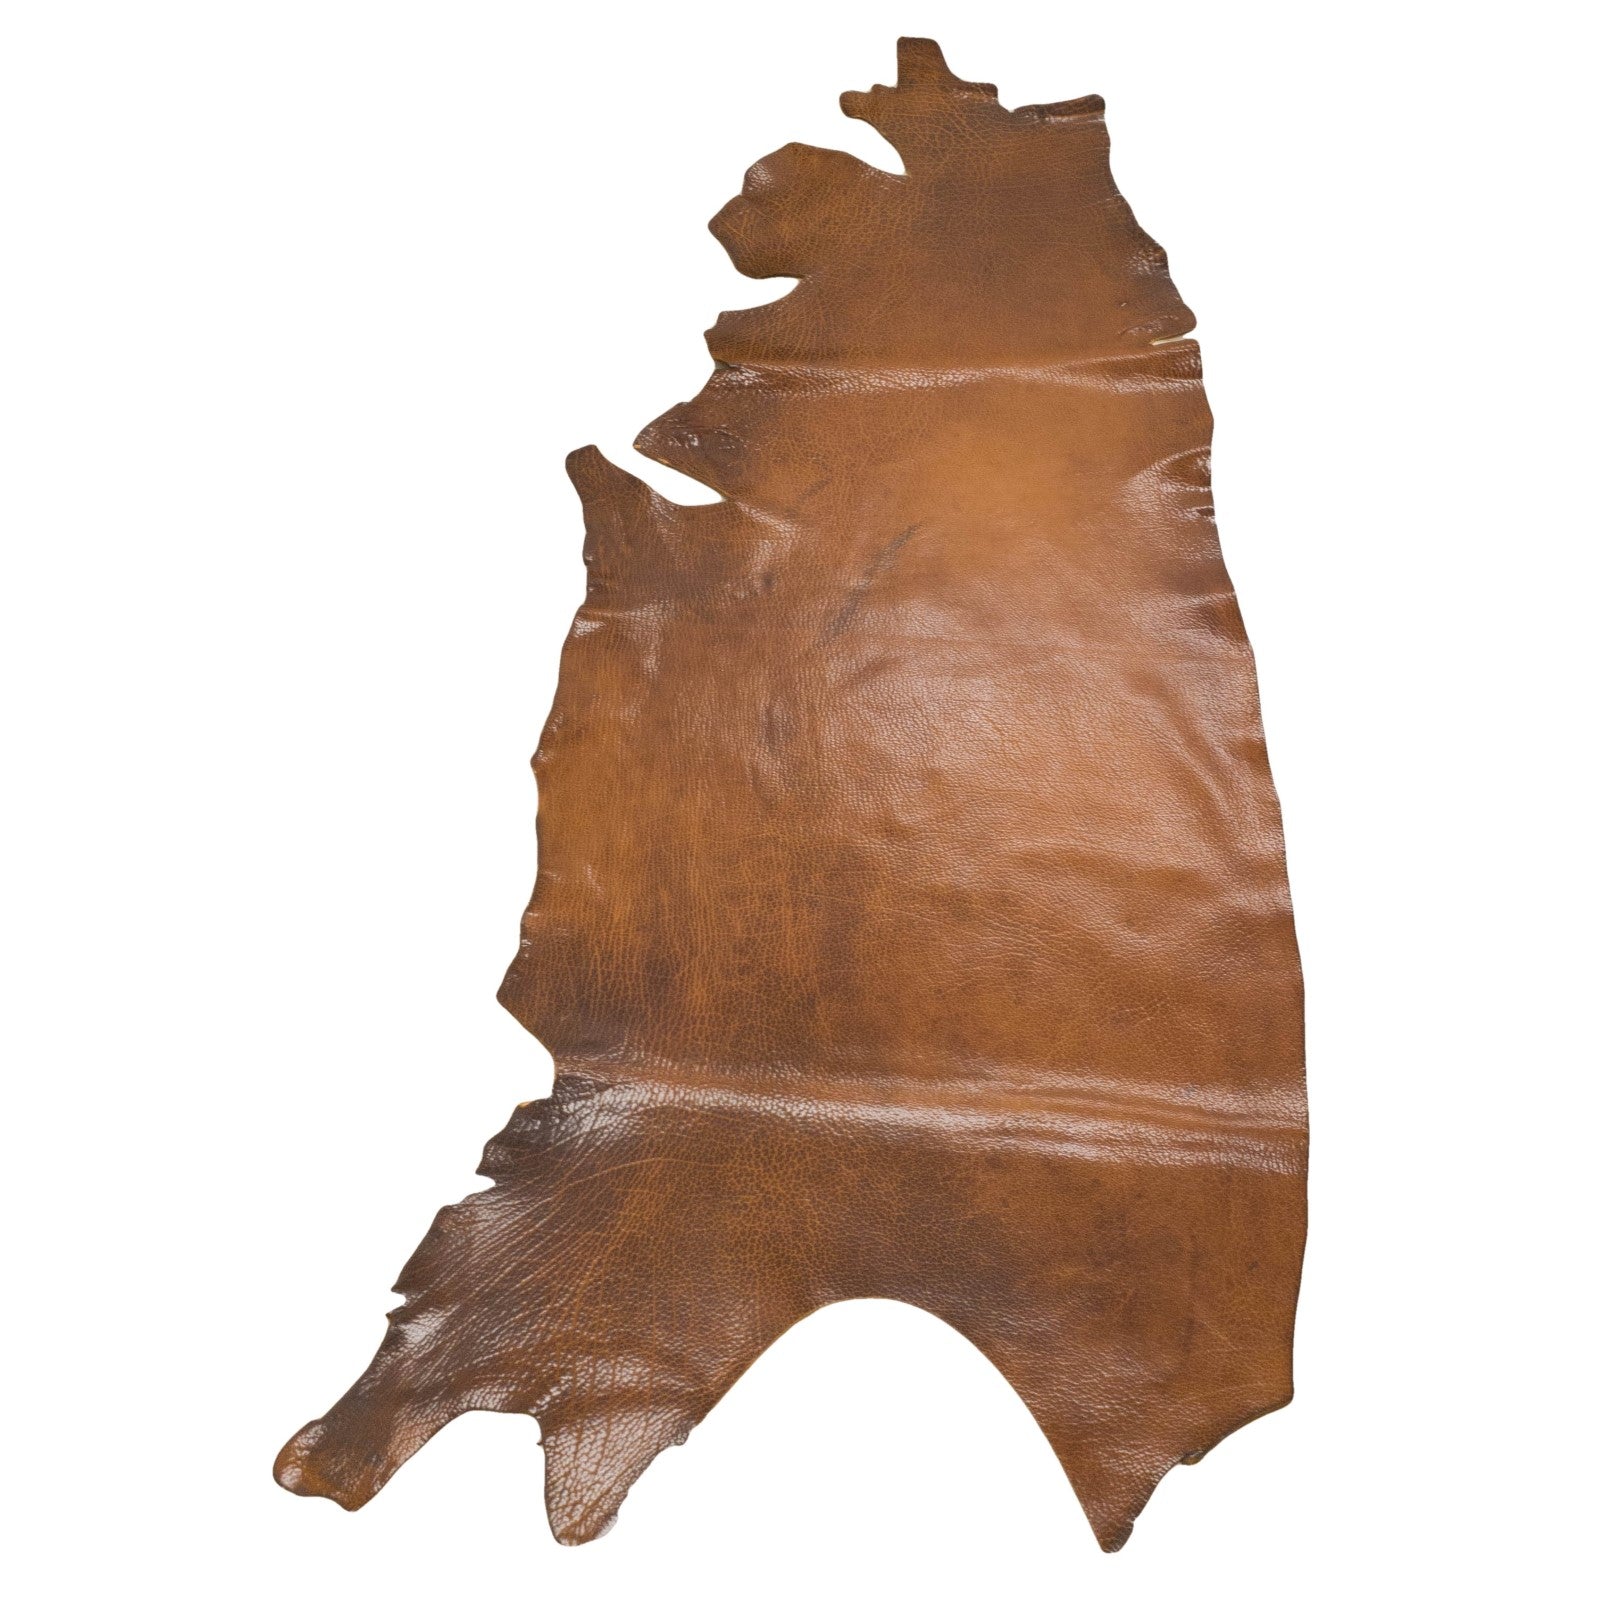 Great Herd Brown, 5-6 oz, 12-26 Sq Ft, Bison Sides, 12-14 Sq Ft | The Leather Guy